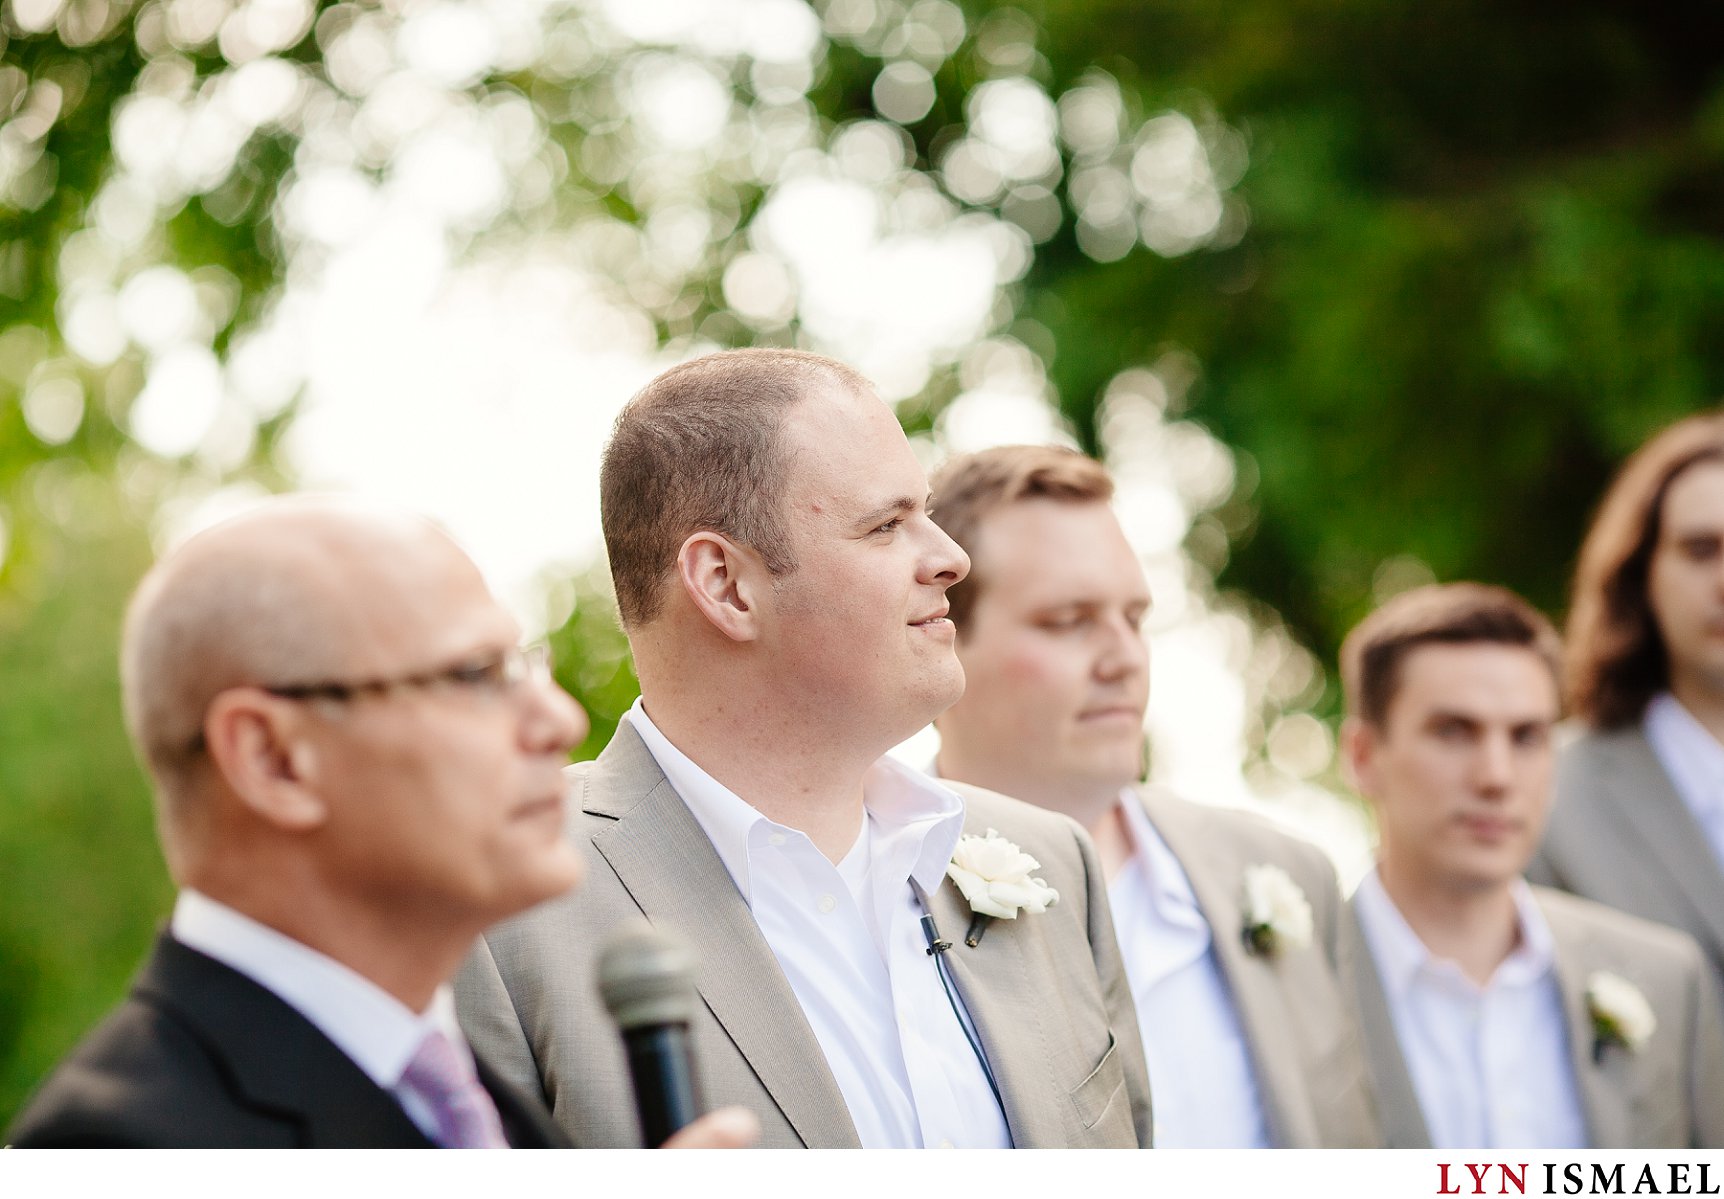 Groom watches his bride walk down the aisle at a Holland Marsh Wineries wedding.